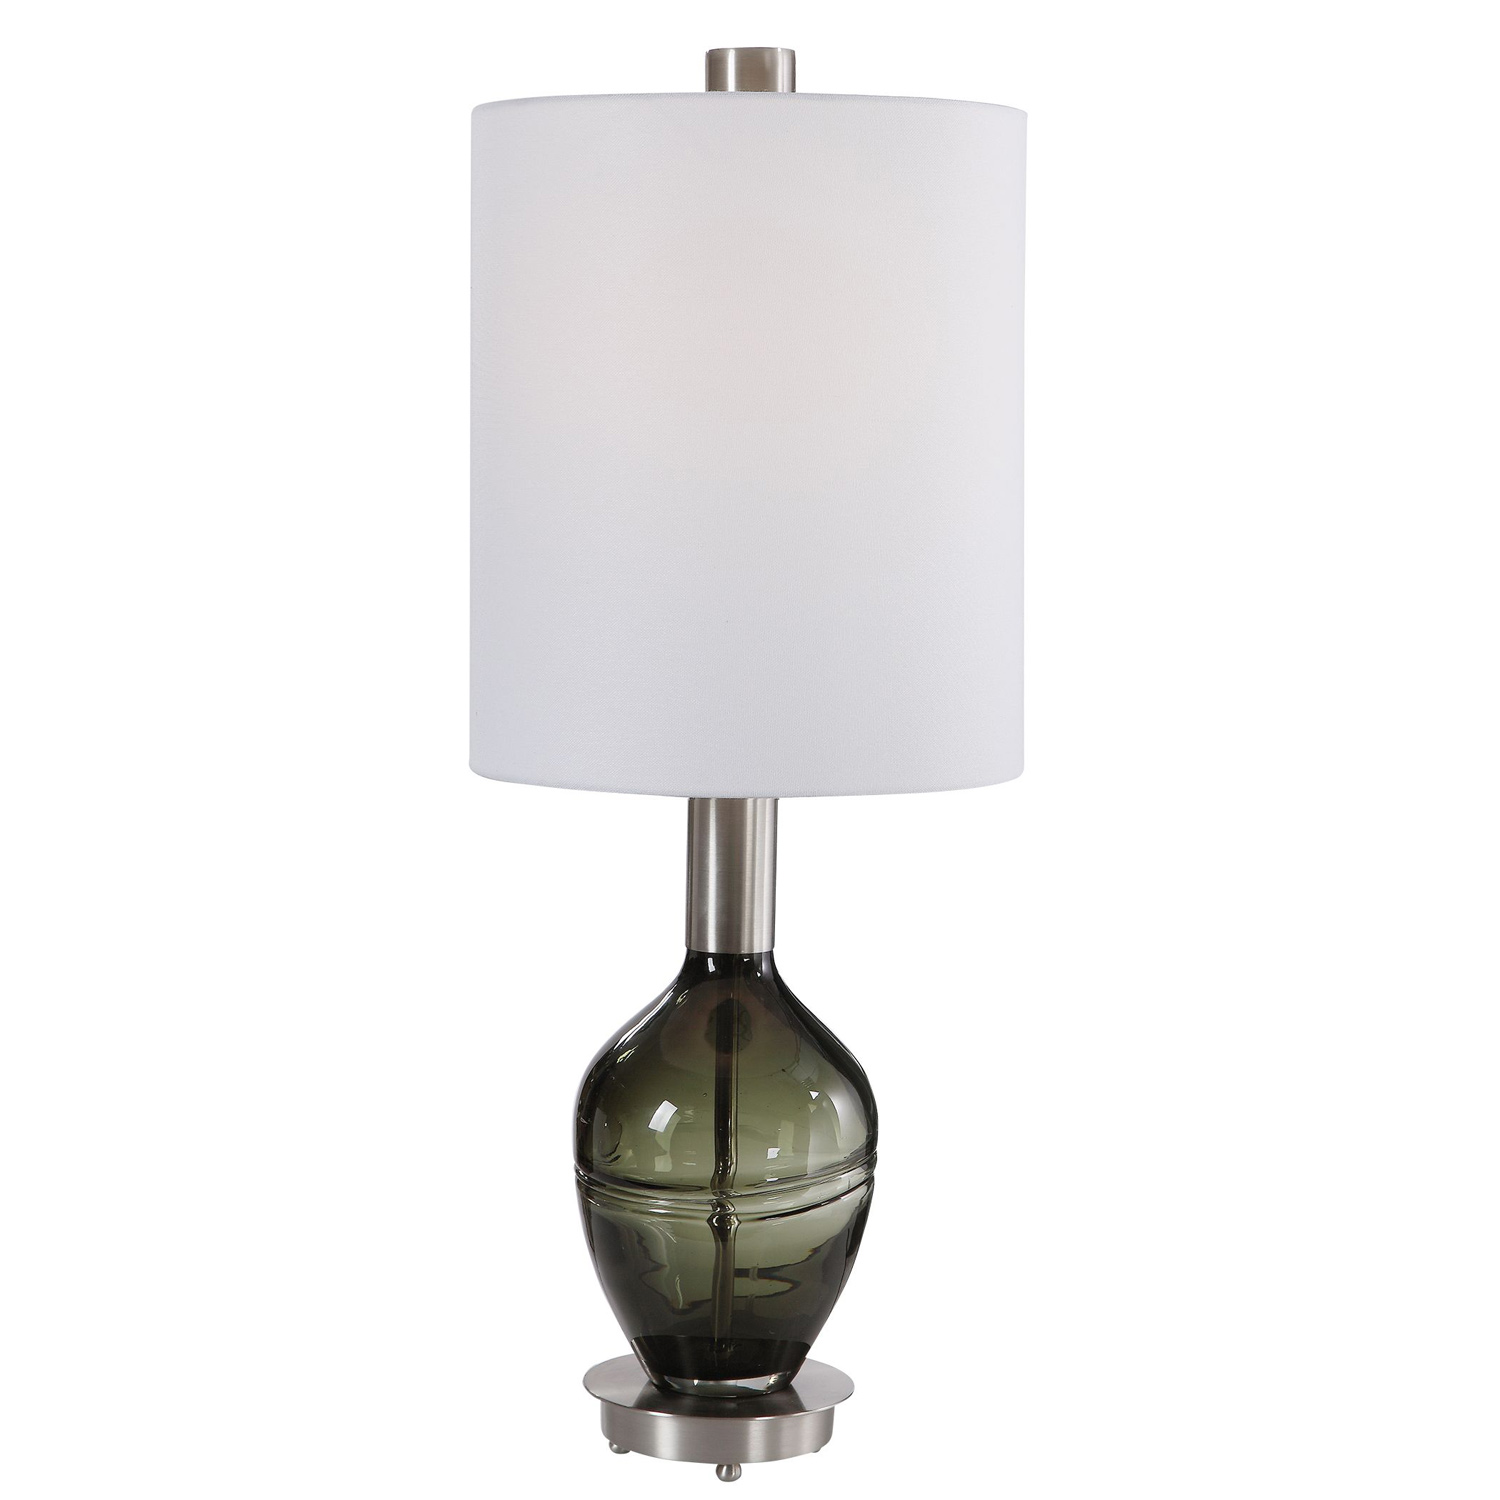 Uttermost Aderia Accent Lamp - Sage Green